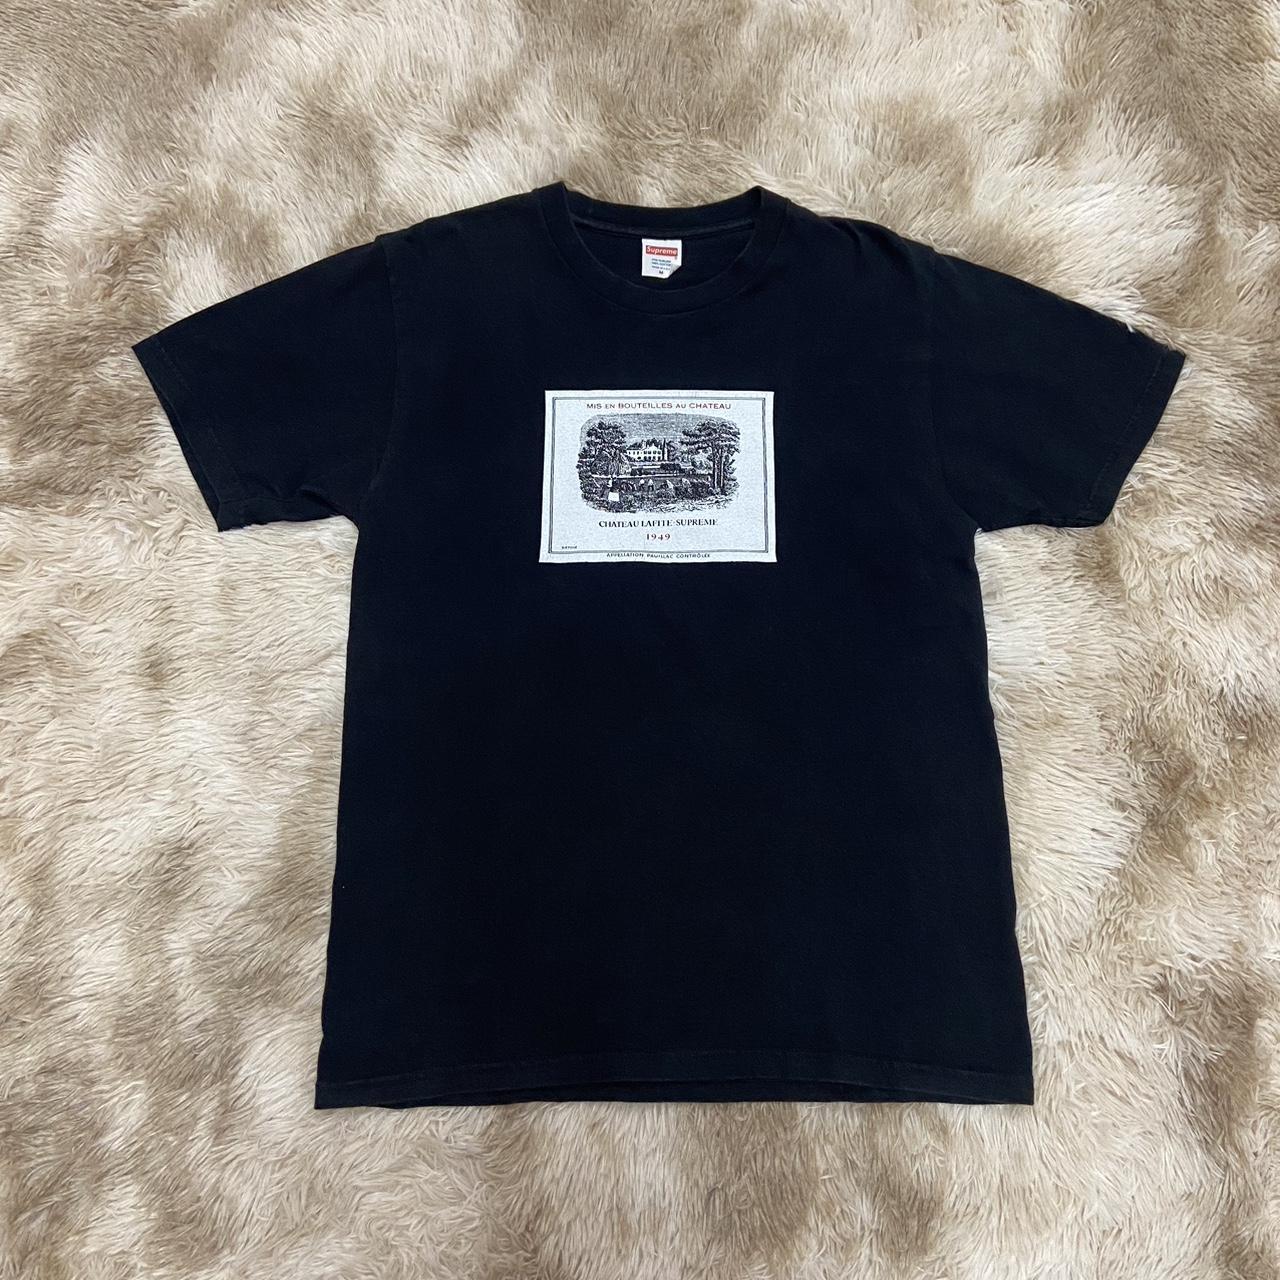 Supreme Chateau Tee size Medium. In great condition....